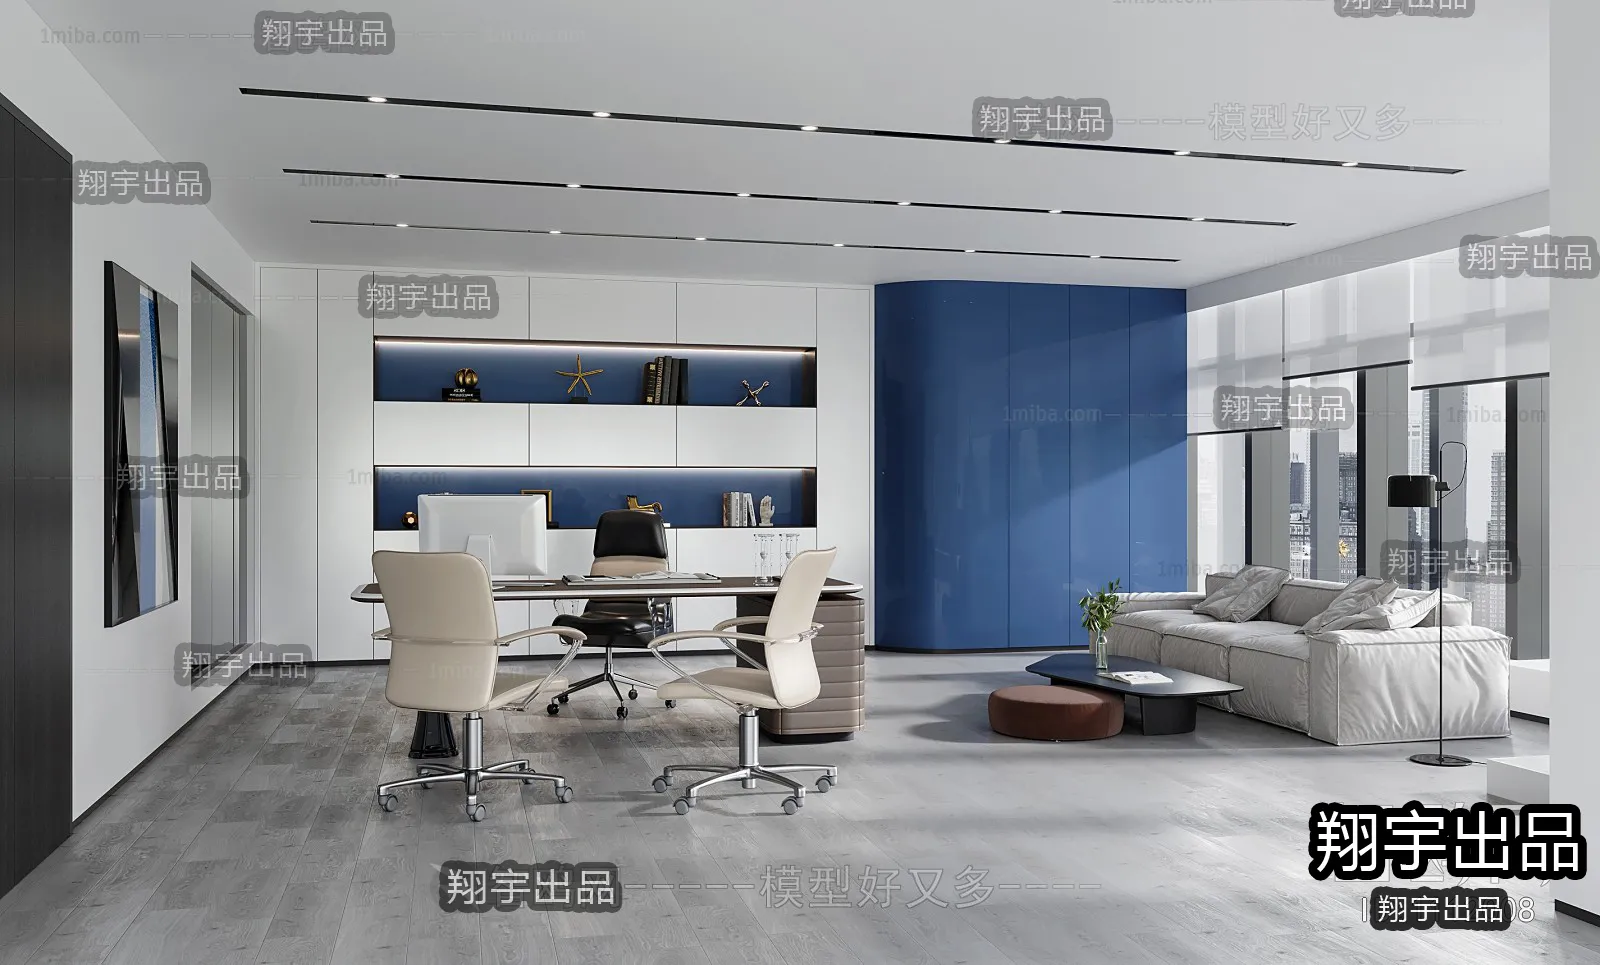 3D OFFICE INTERIOR (VRAY) – MANAGER ROOM 3D SCENES – 076